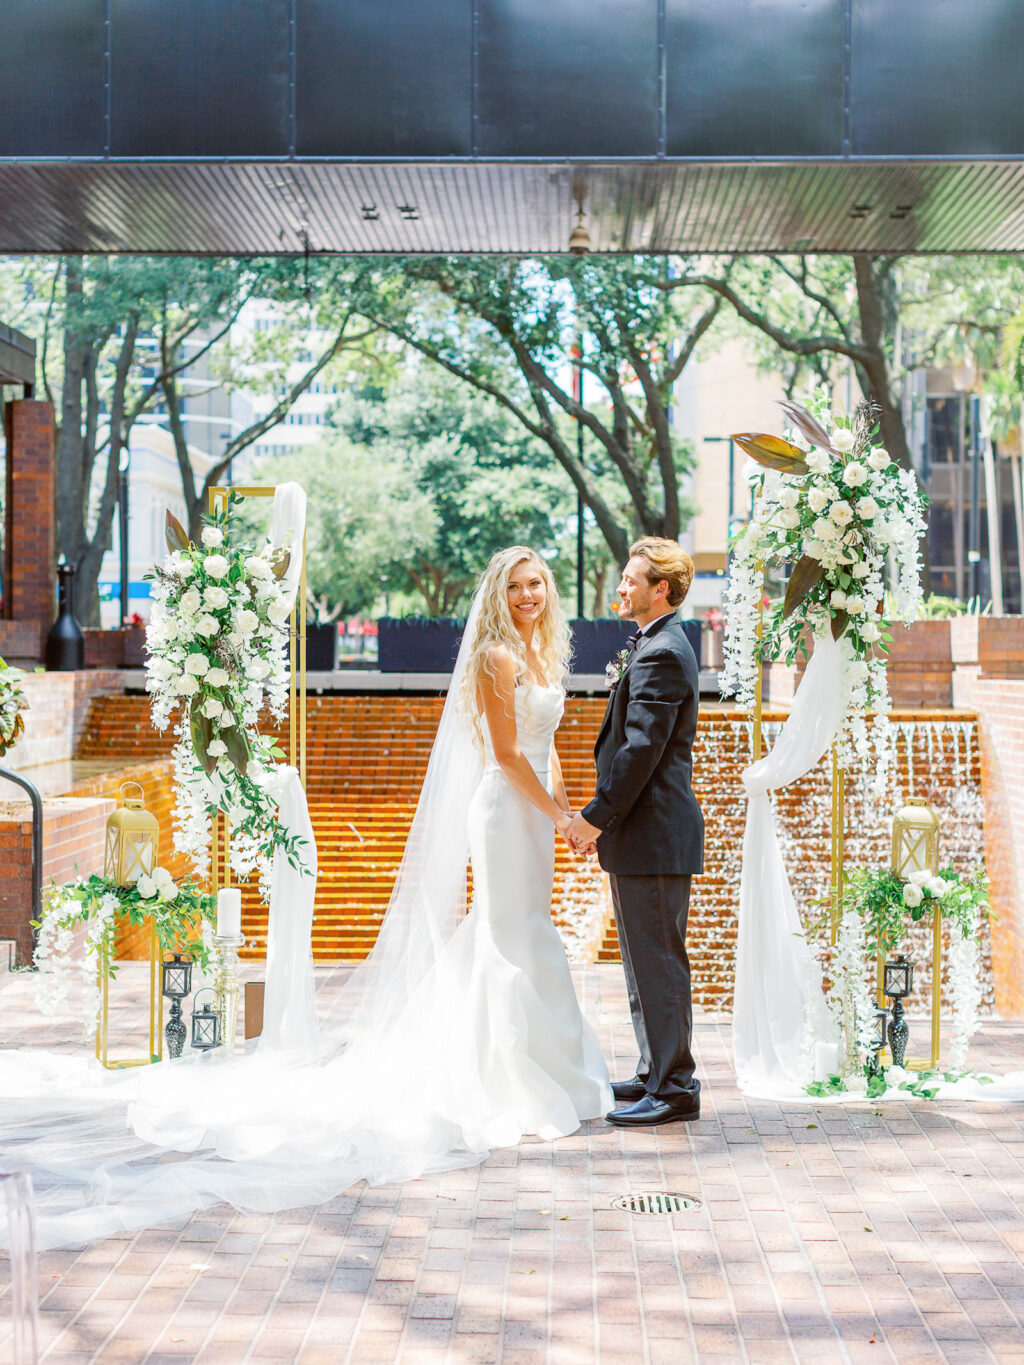 Bride in Tampa Wedding Ceremony in Fit and Flare Wedding Dress with Long Train Veil | Truly Forever Bridal